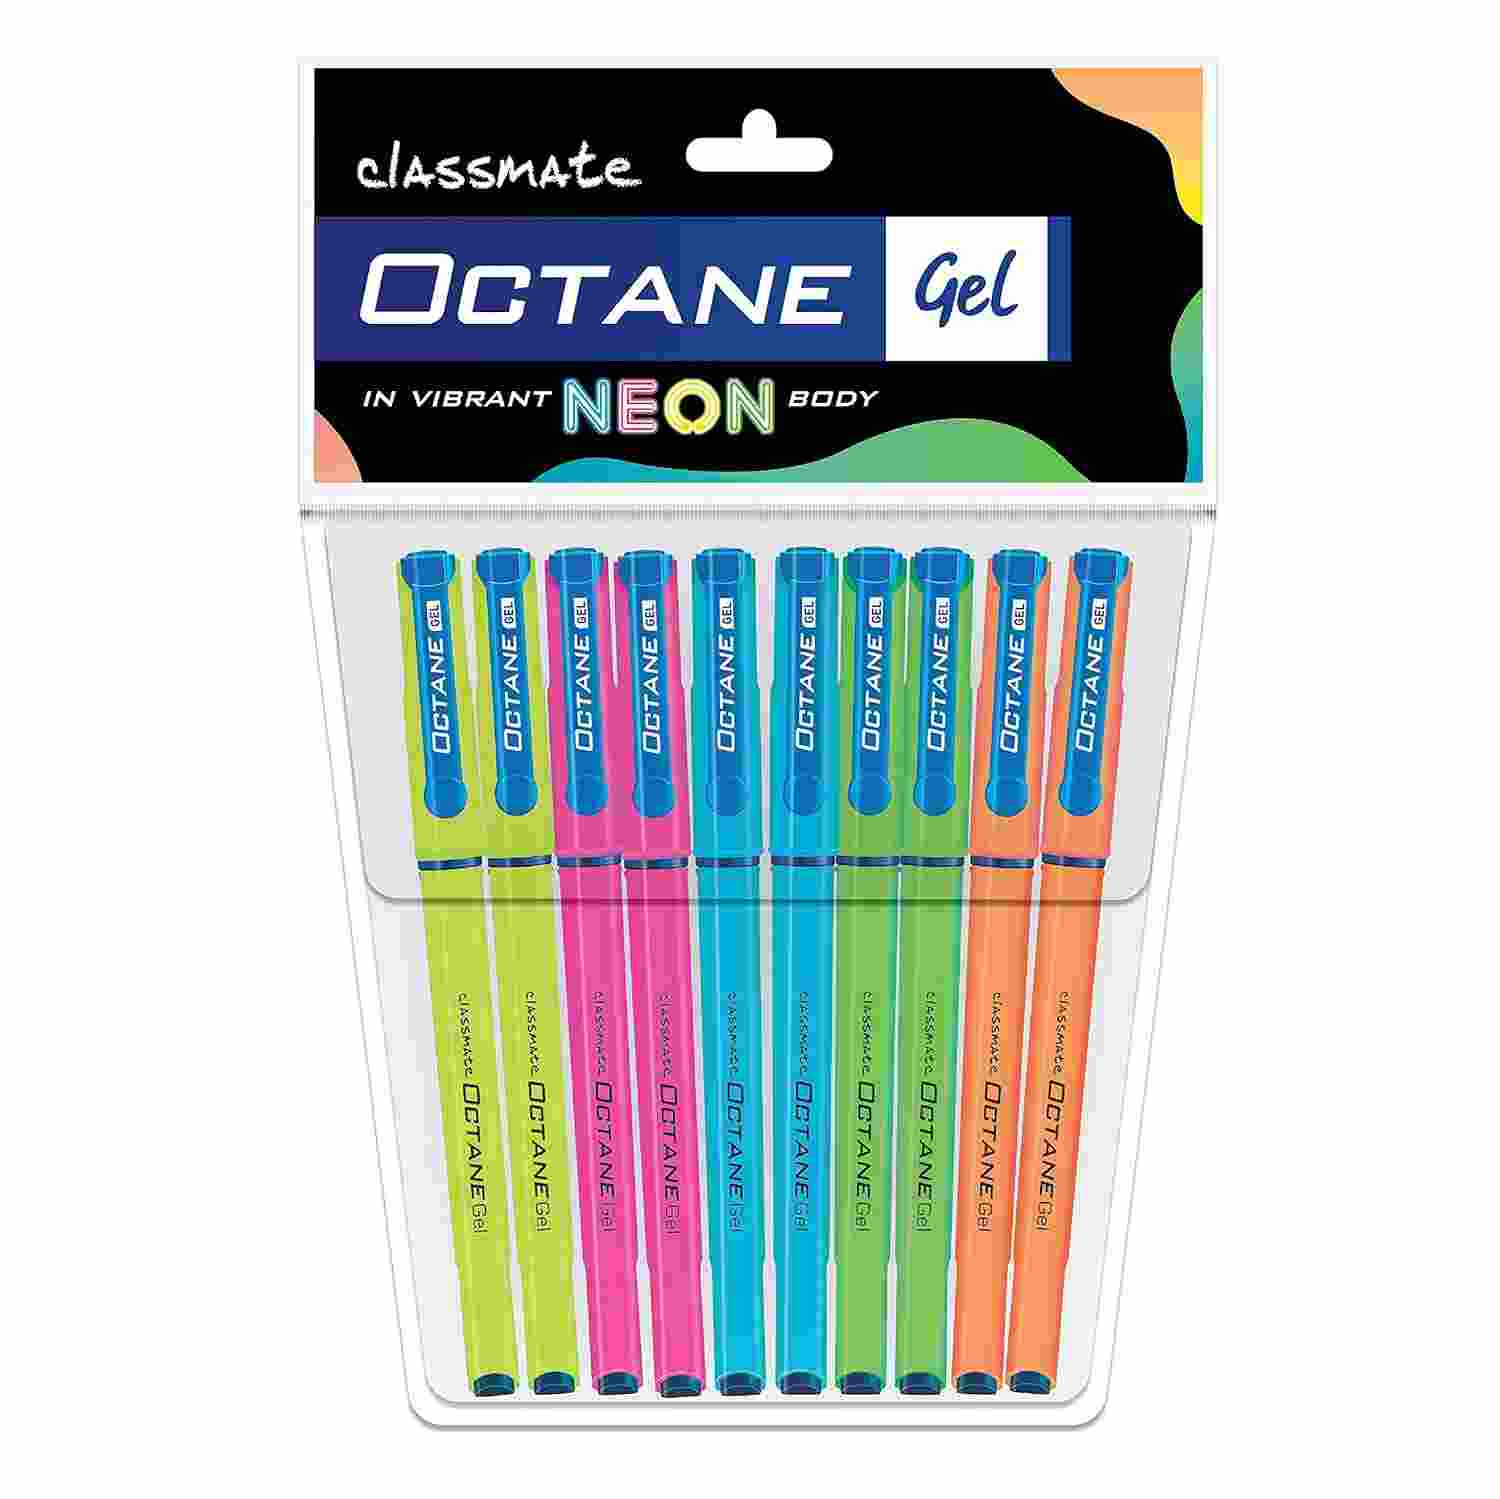 Classmate Octane Neon- Blue Gel Pens (Pack of 20)|Smooth Writing Pens|Water-Proof Ink for Smudge-Free writing|Attractive Neon Body Colours|Preferred by Students for Exam & Class Notes